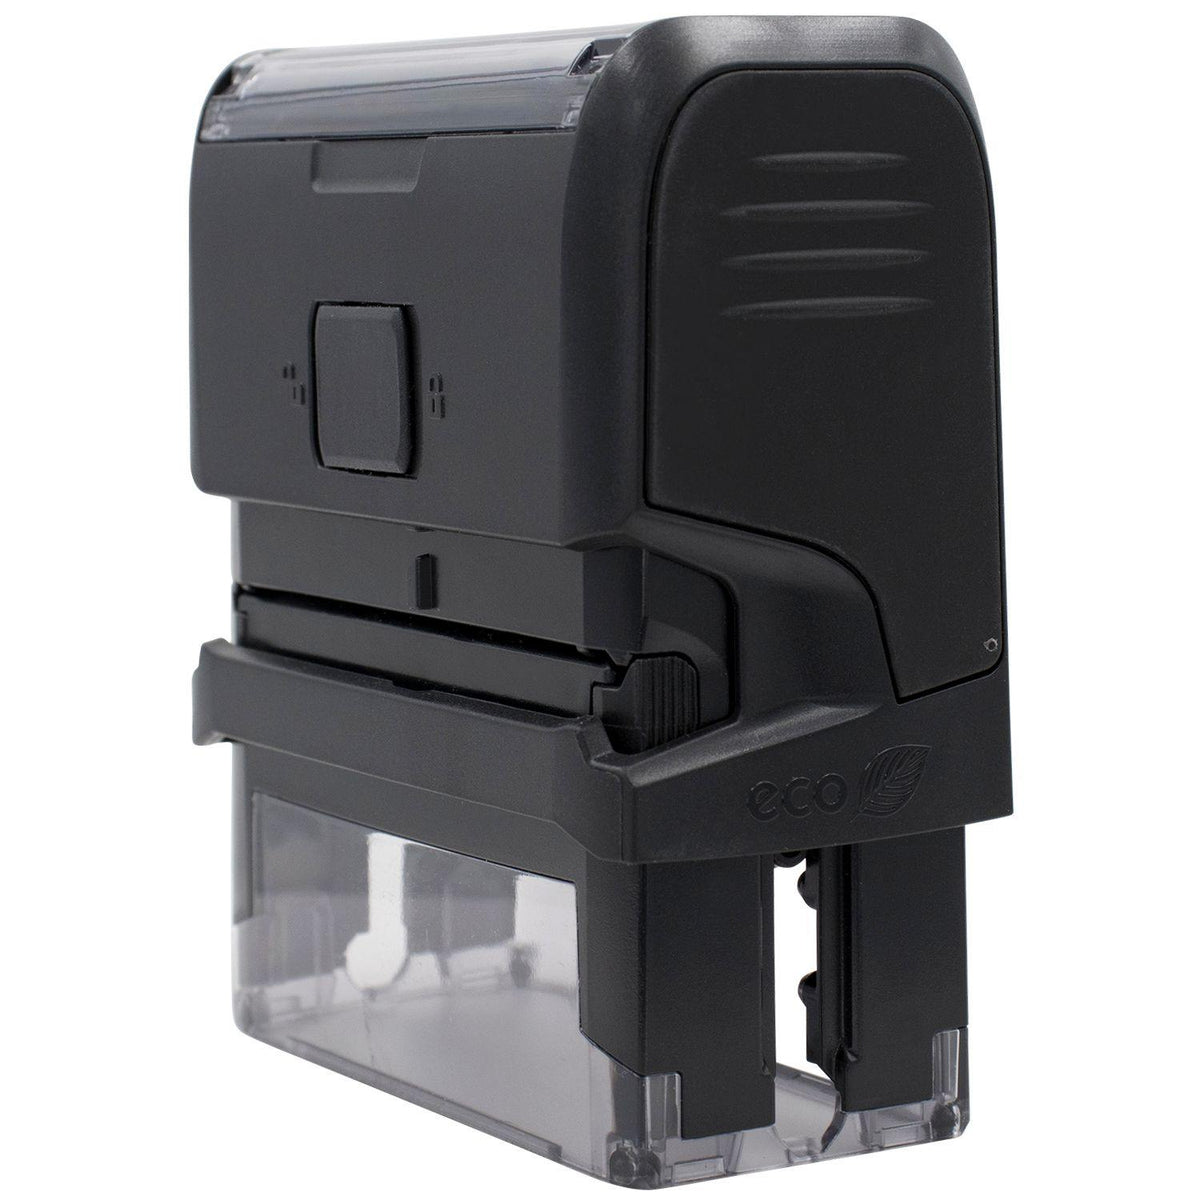 Large Self Inking Pregnant Stamp - Engineer Seal Stamps - Brand_Trodat, Impression Size_Large, Stamp Type_Self-Inking Stamp, Type of Use_Medical Office